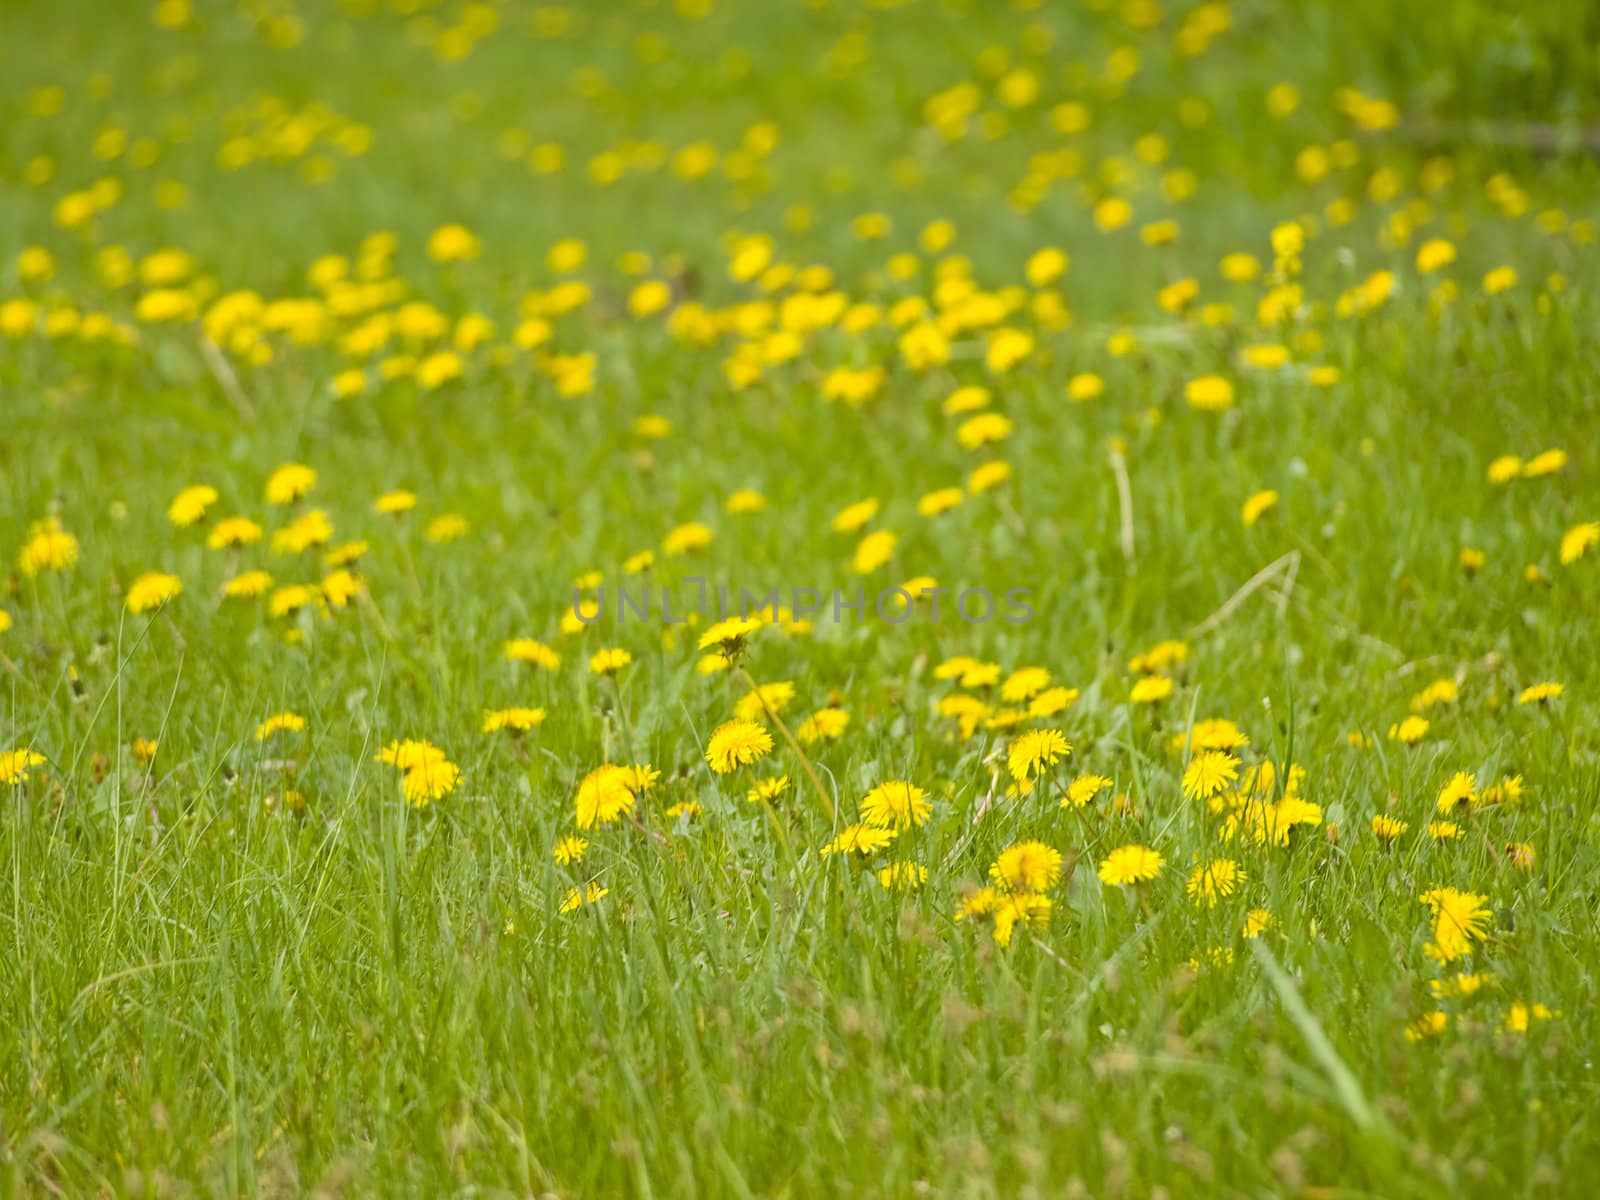 Many yellow spring dandelions at the green grass